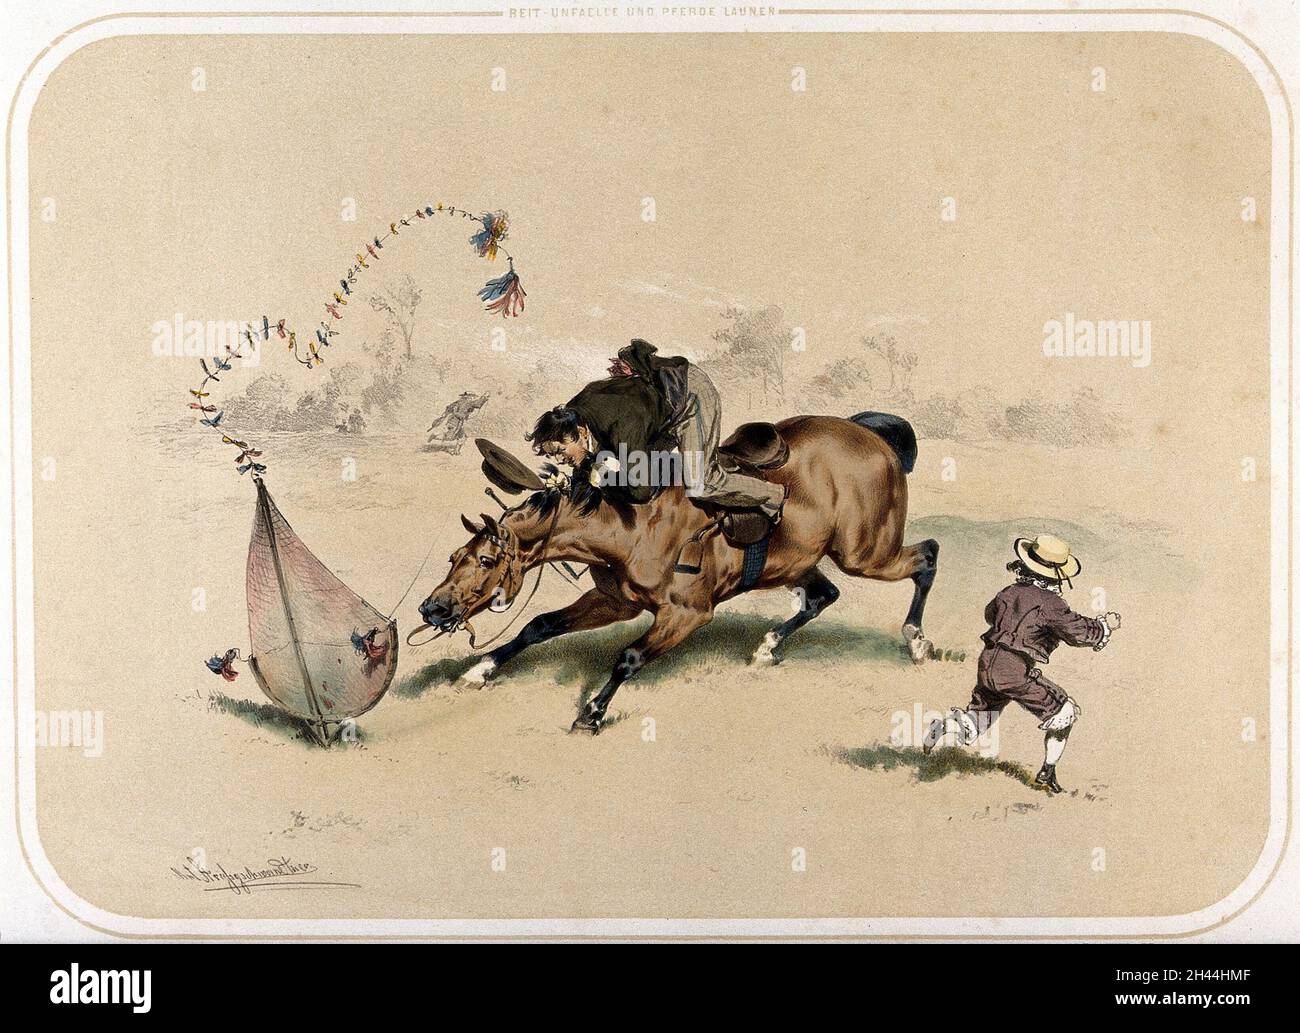 A horse baulks at a toy kite which has suddenly plummeted to the ground in its path, almost unseating its rider. Coloured lithograph by A. Strassgschwandtner after himself, ca. 1860. Stock Photo